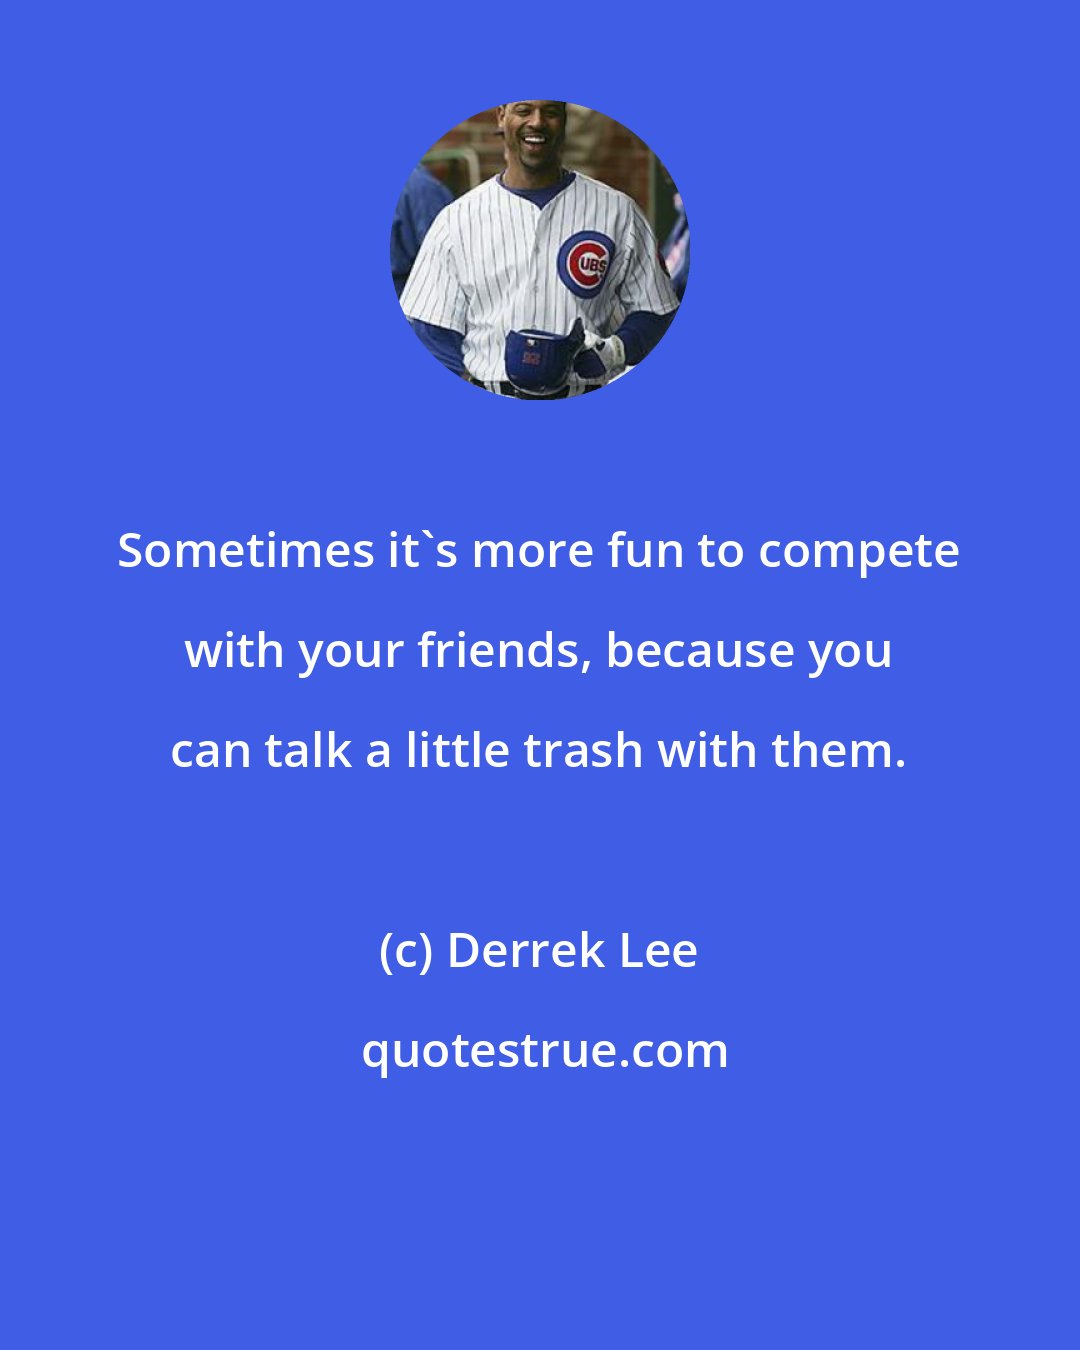 Derrek Lee: Sometimes it's more fun to compete with your friends, because you can talk a little trash with them.